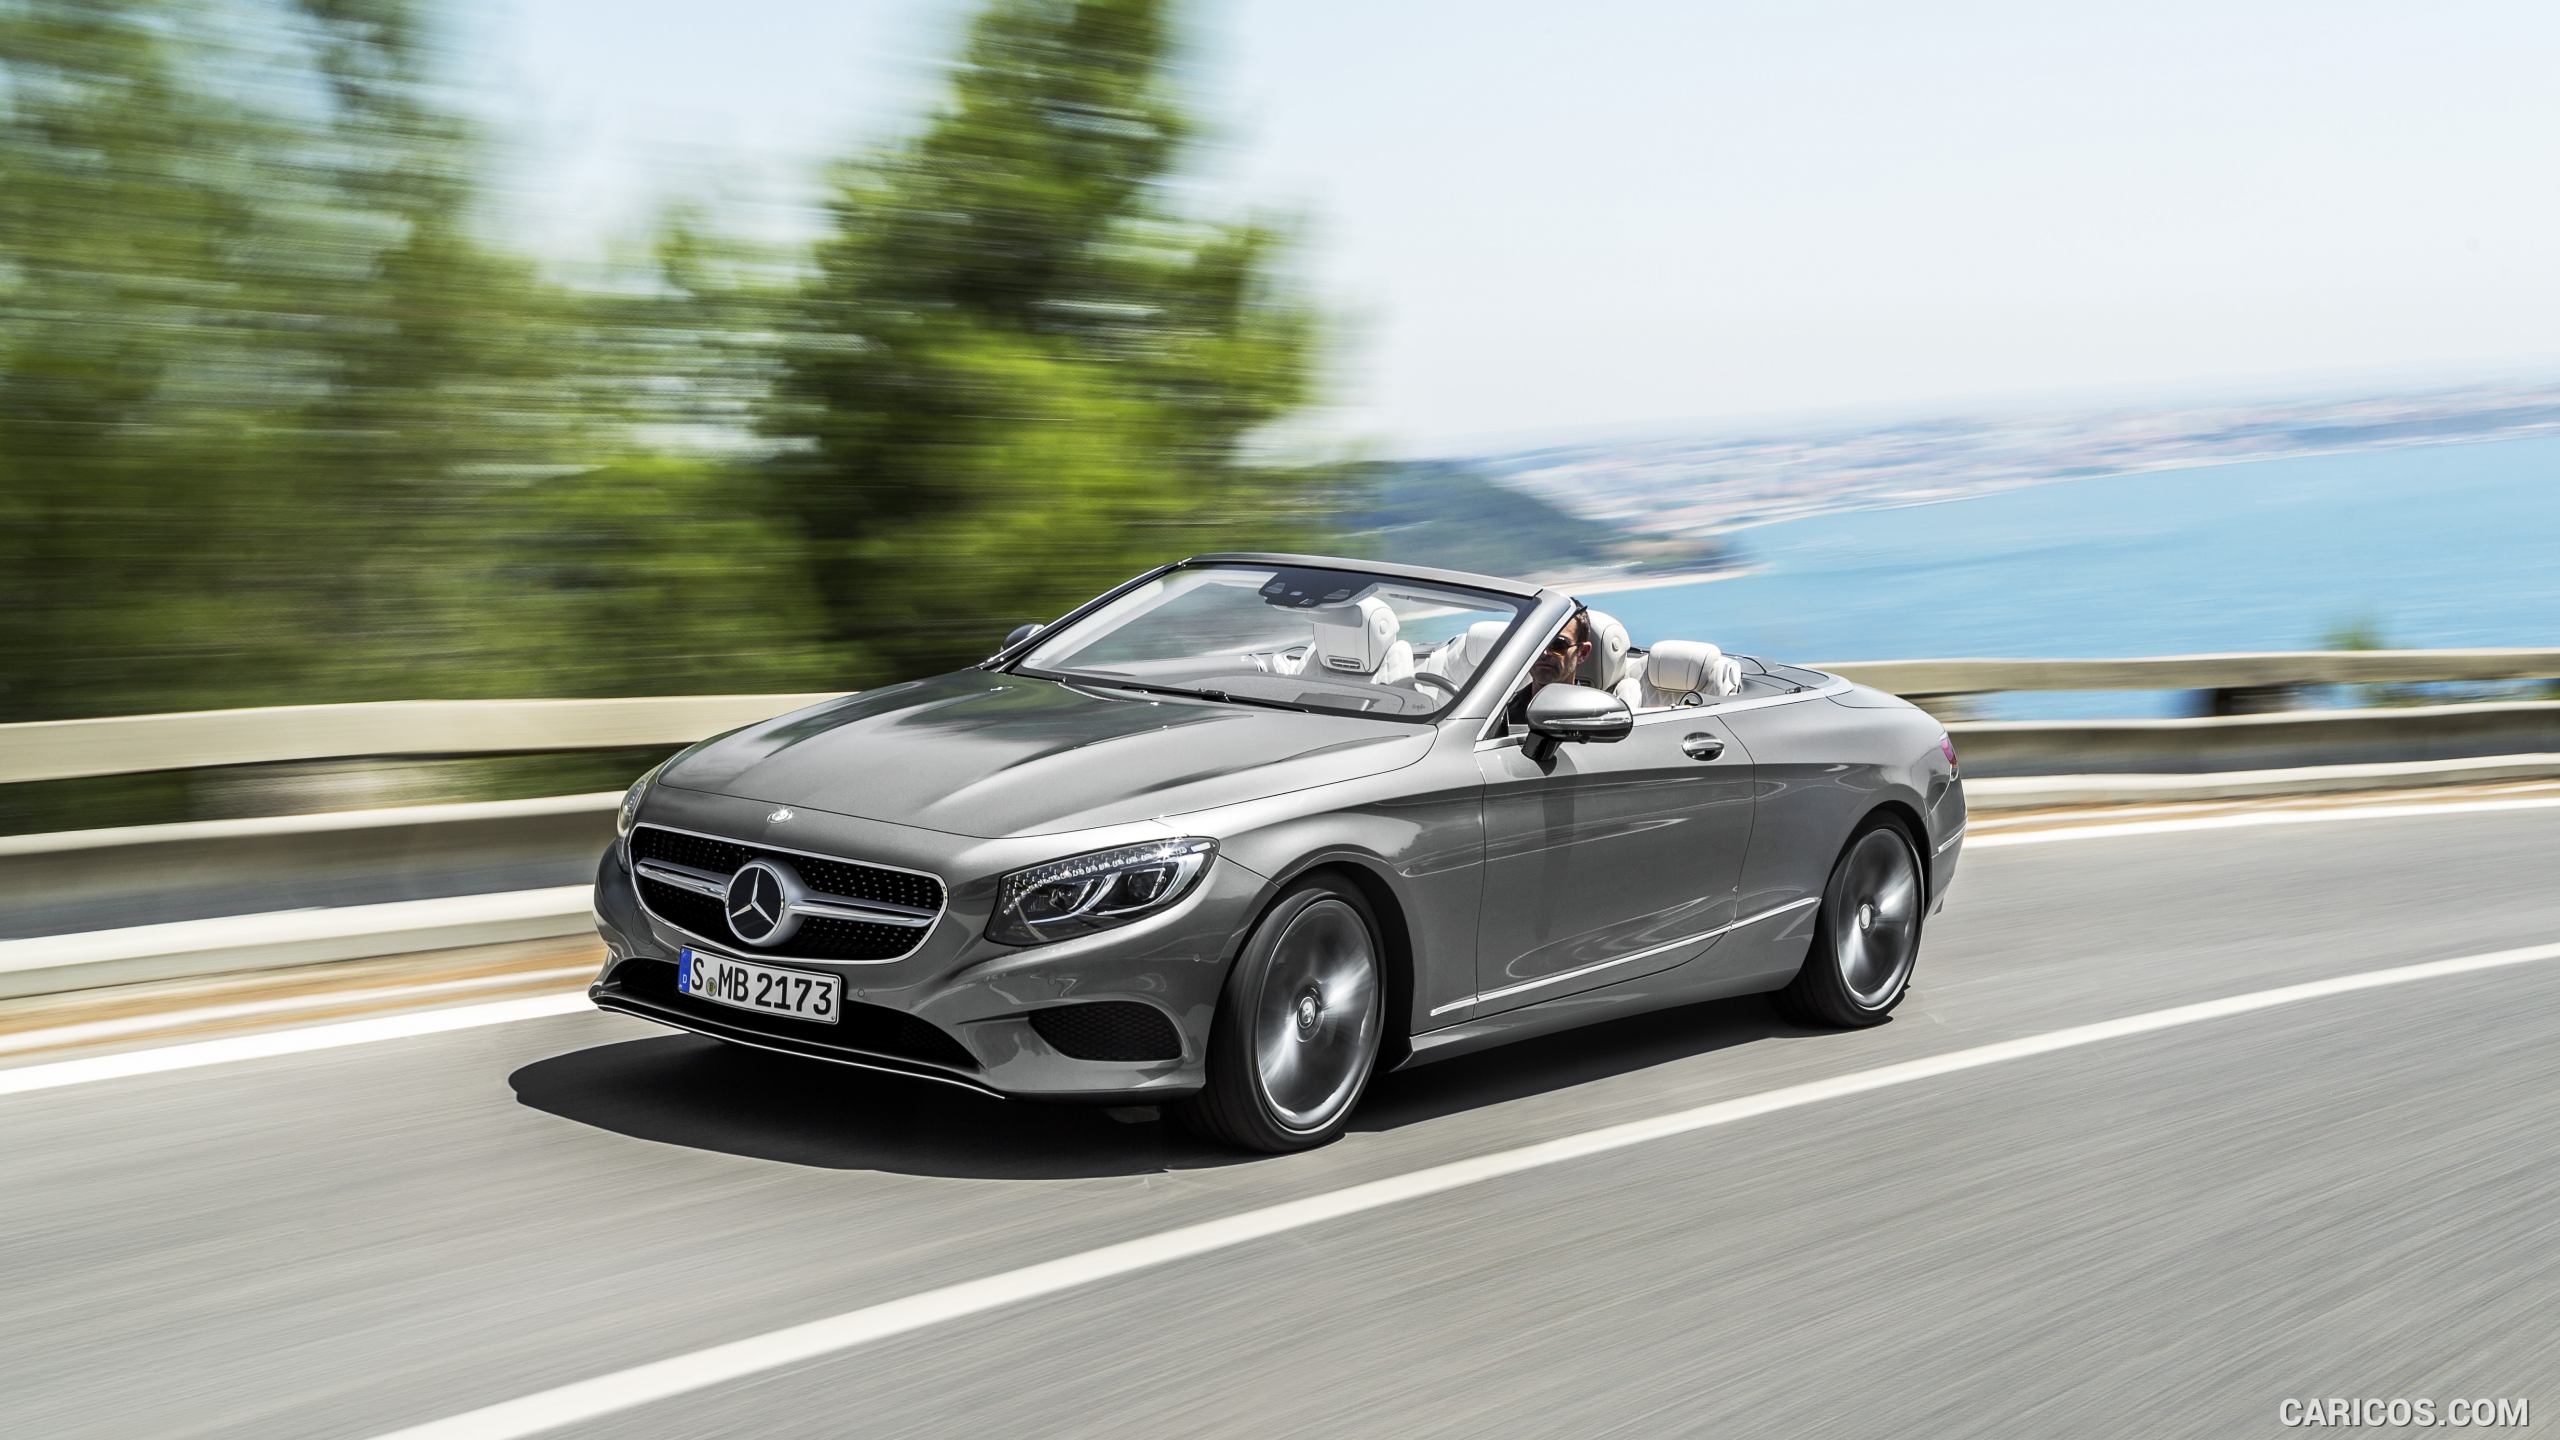 2017 Mercedes-Benz S-Class S500 Cabriolet (Selenit Grey) - Front, #8 of 56